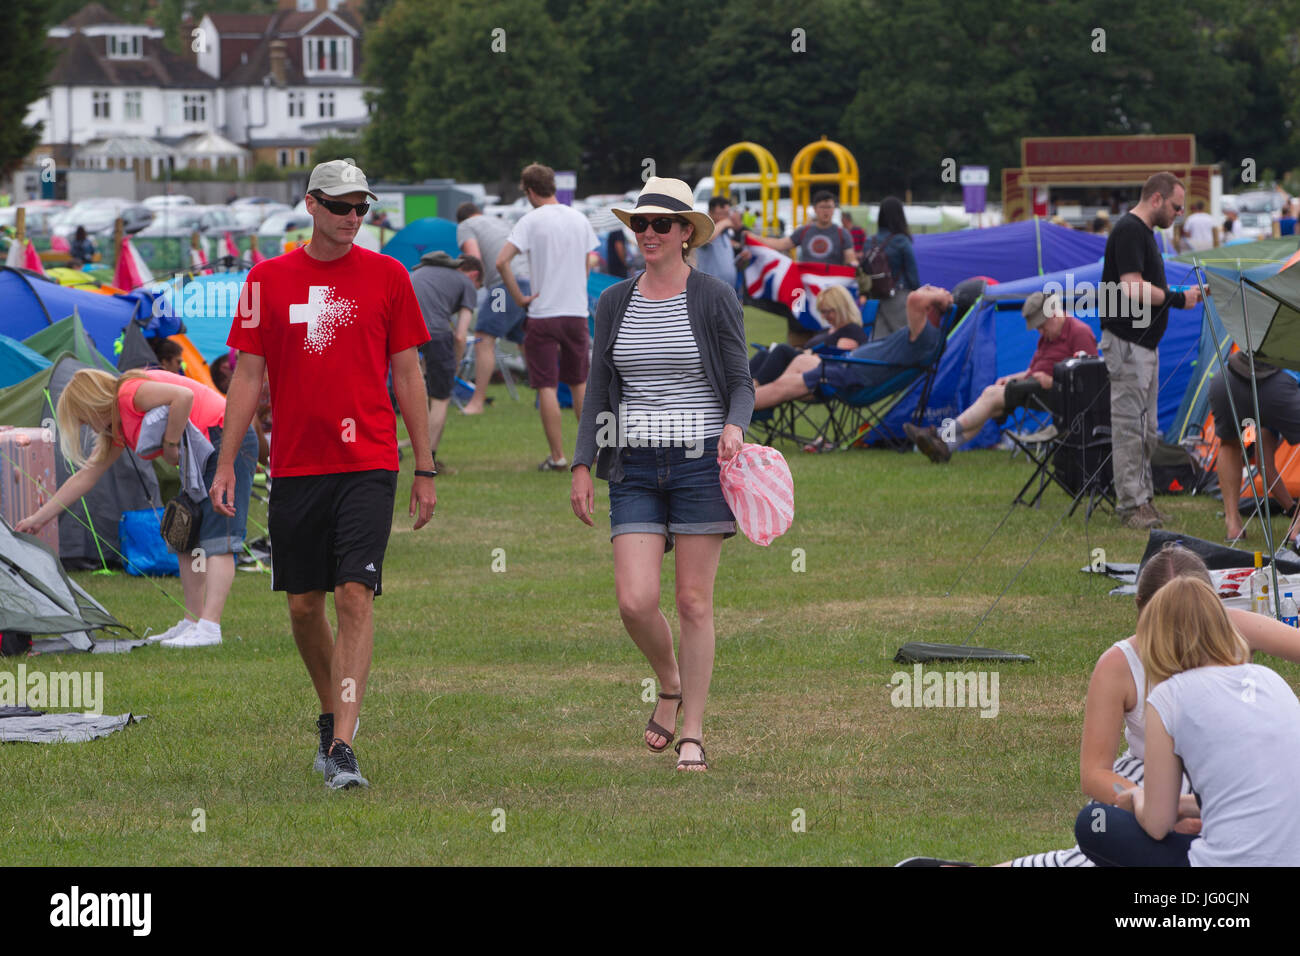 London, UK. 3rd Jul, 2017. Wimbledon Tennis Championships 2017, Wimbledon Lawn Tennis Club, Southwest London, England, UK. 03rd July, 2017. People queue up in the traditional camping lines on Wimbledon Park to get tickets for the following days Wimbledon Tennis Championships 2017 on the main Centre Court and Court One. Credit: Clickpics/Alamy Live News Stock Photo